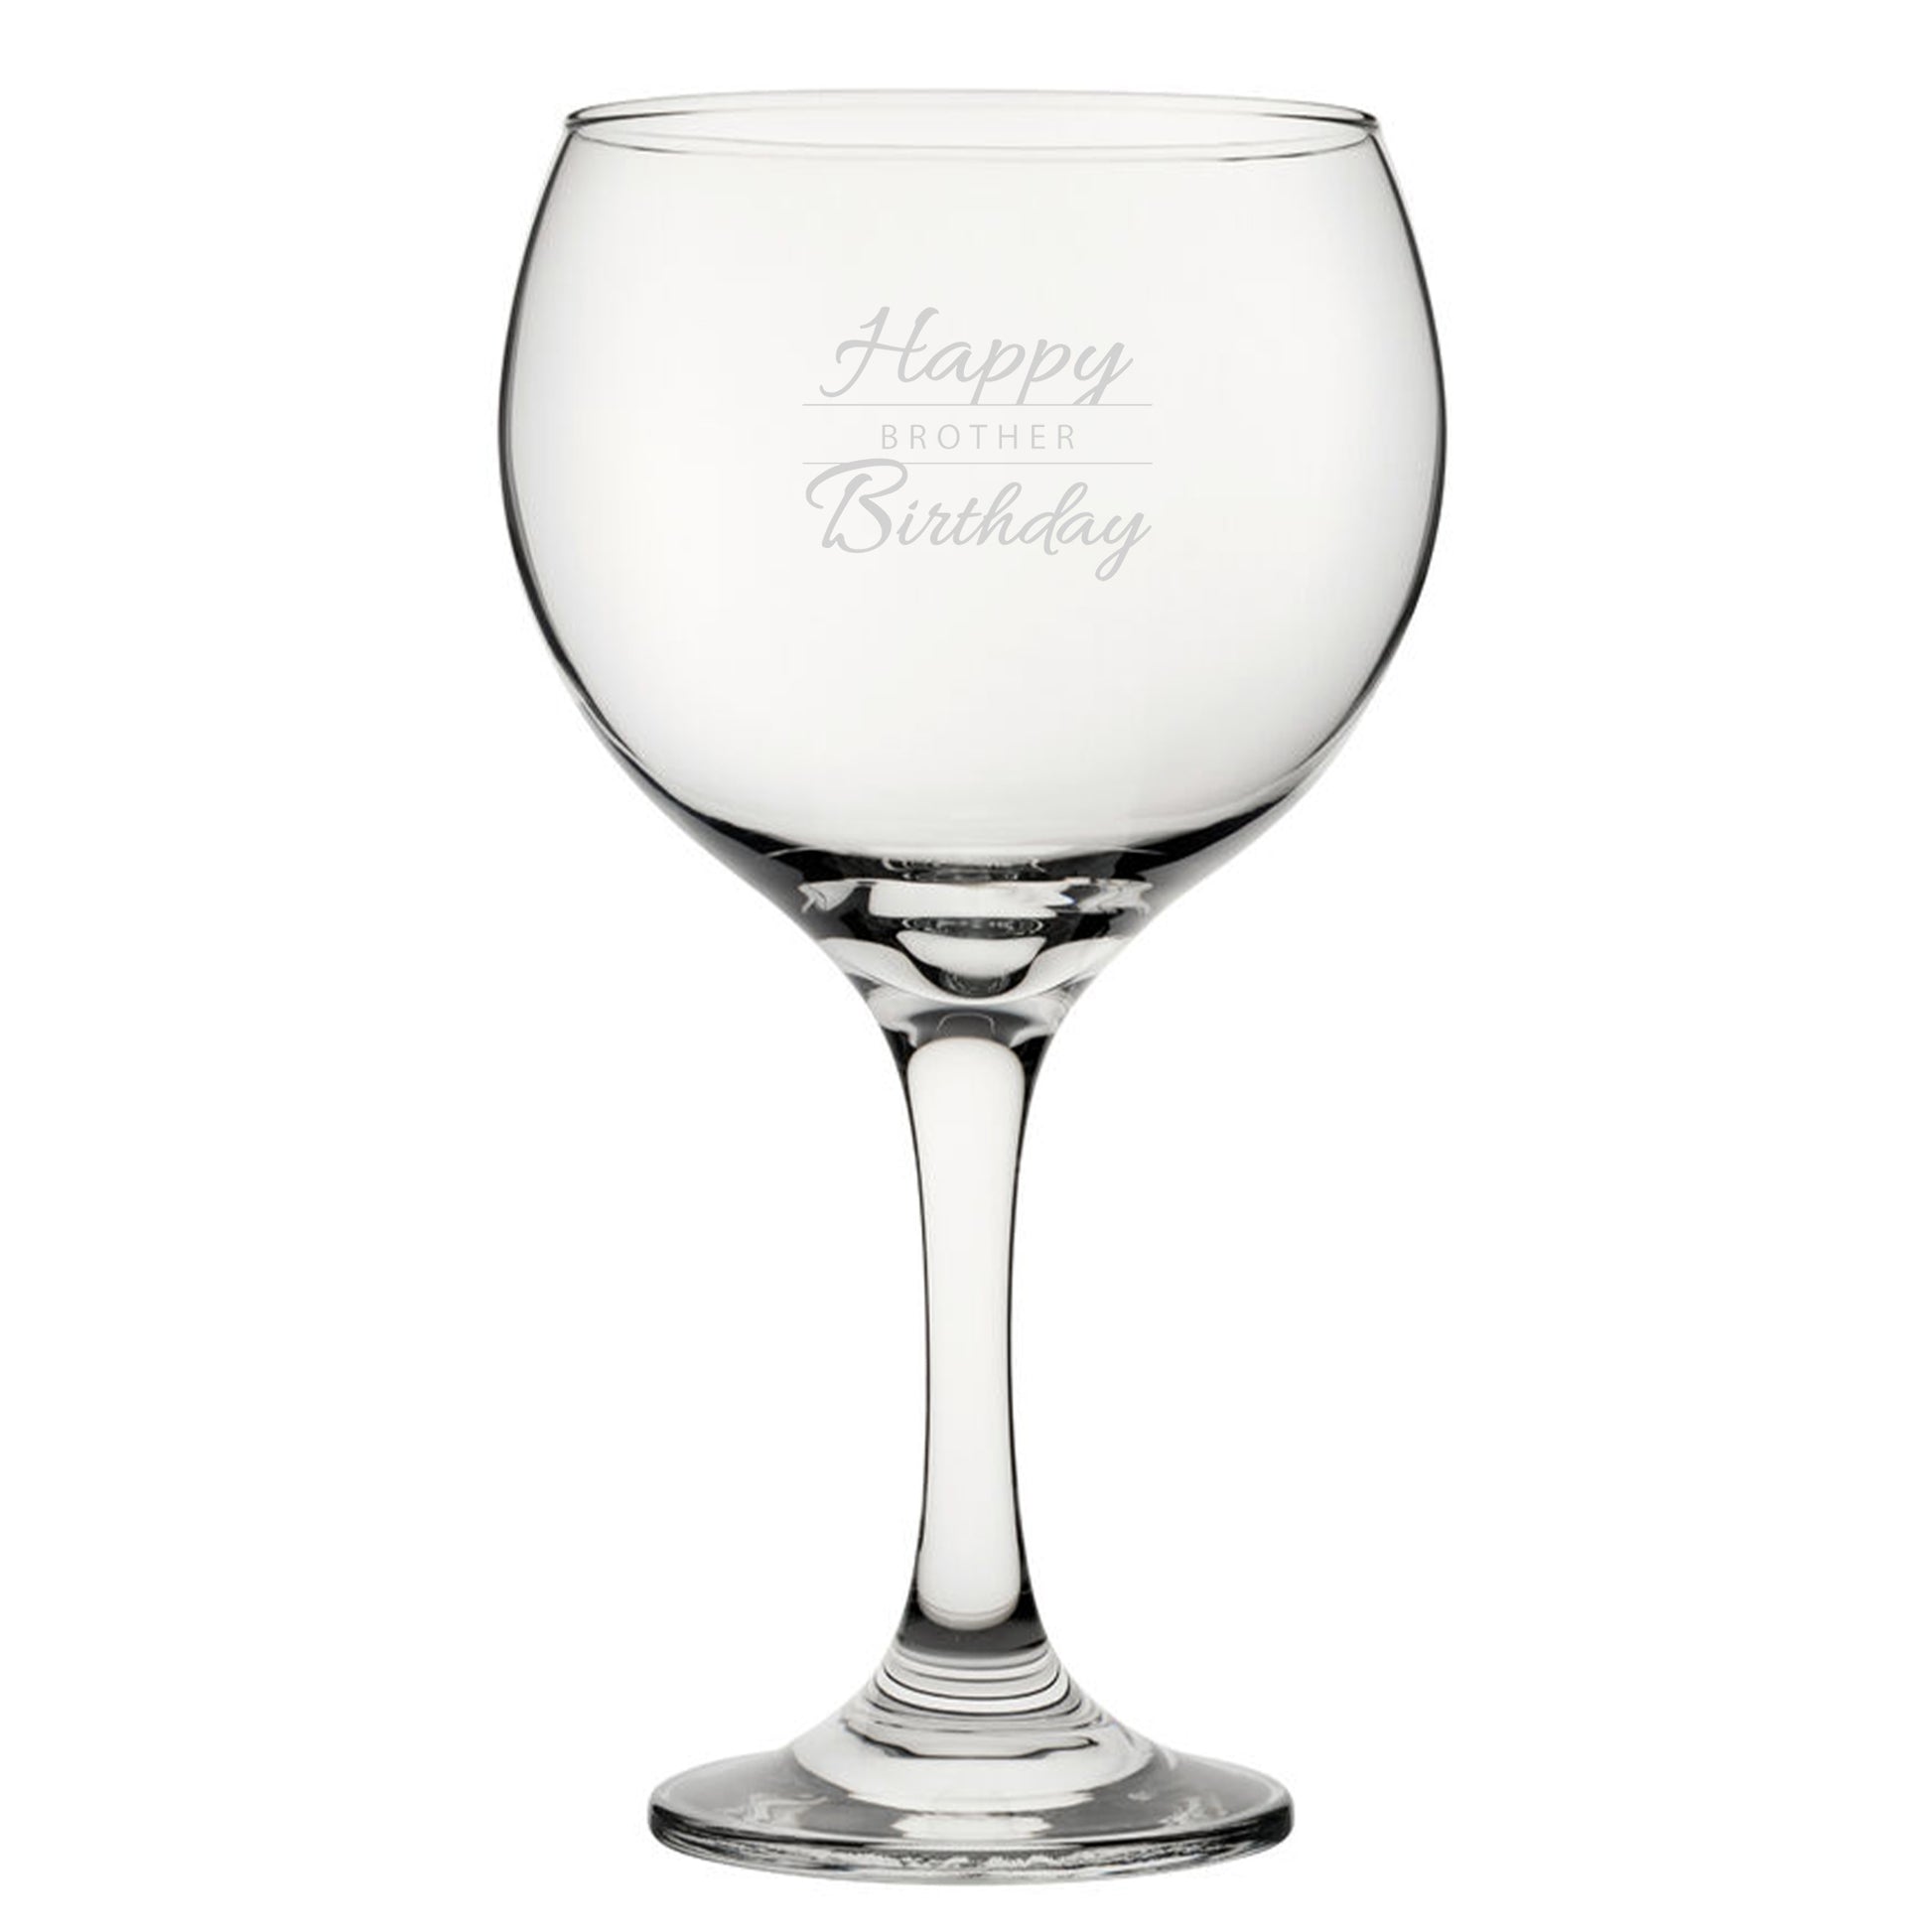 Happy Birthday Brother Modern Design - Engraved Novelty Gin Balloon Cocktail Glass Image 1